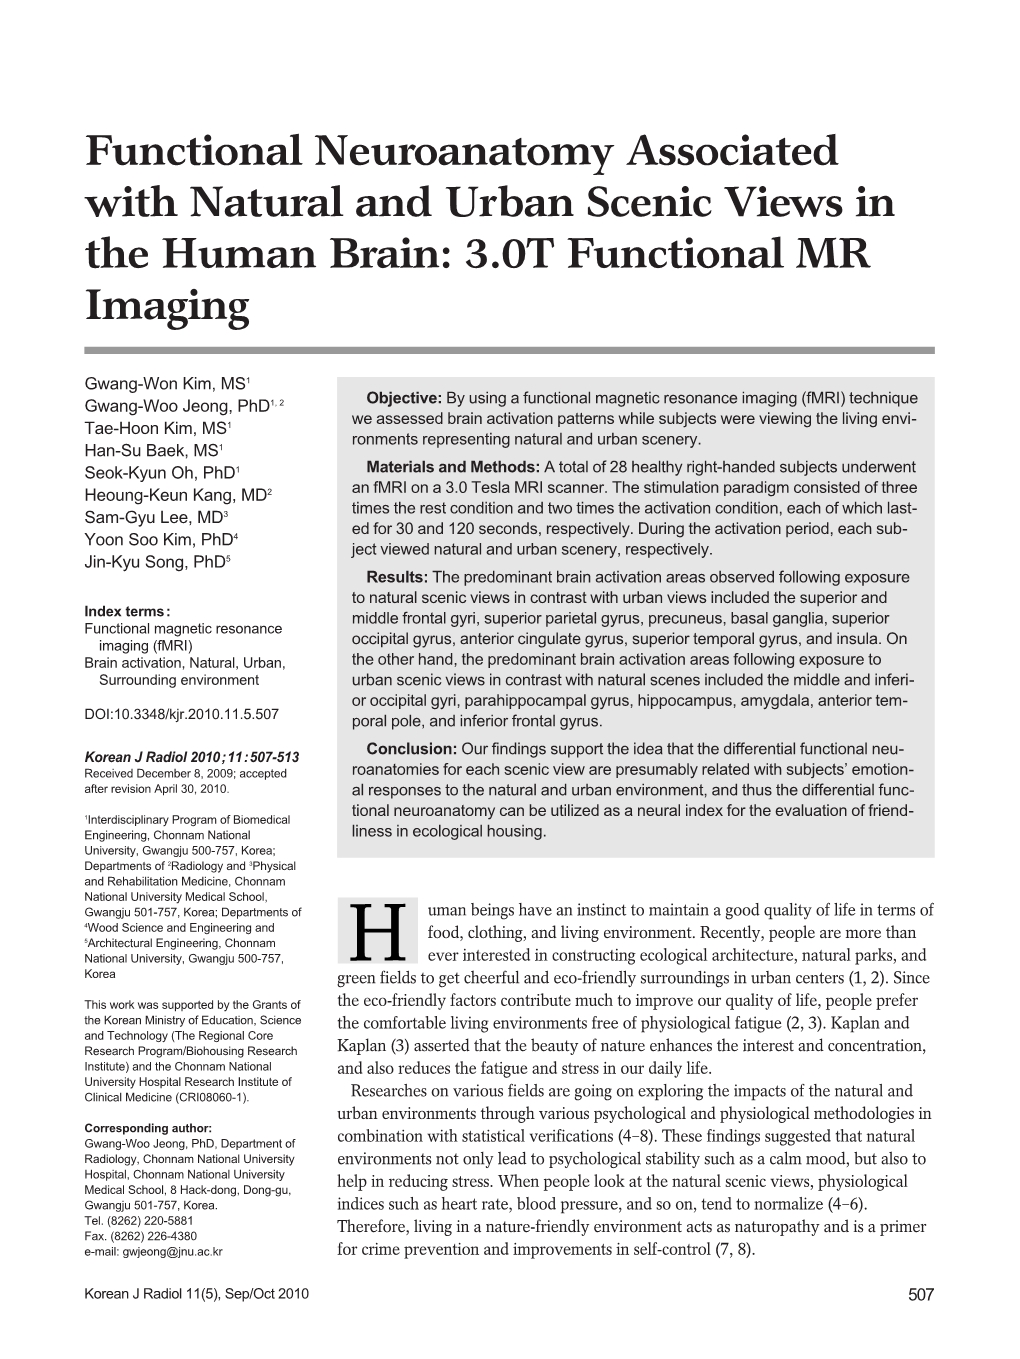 Functional Neuroanatomy Associated with Natural and Urban Scenic Views in the Human Brain: 3.0T Functional MR Imaging